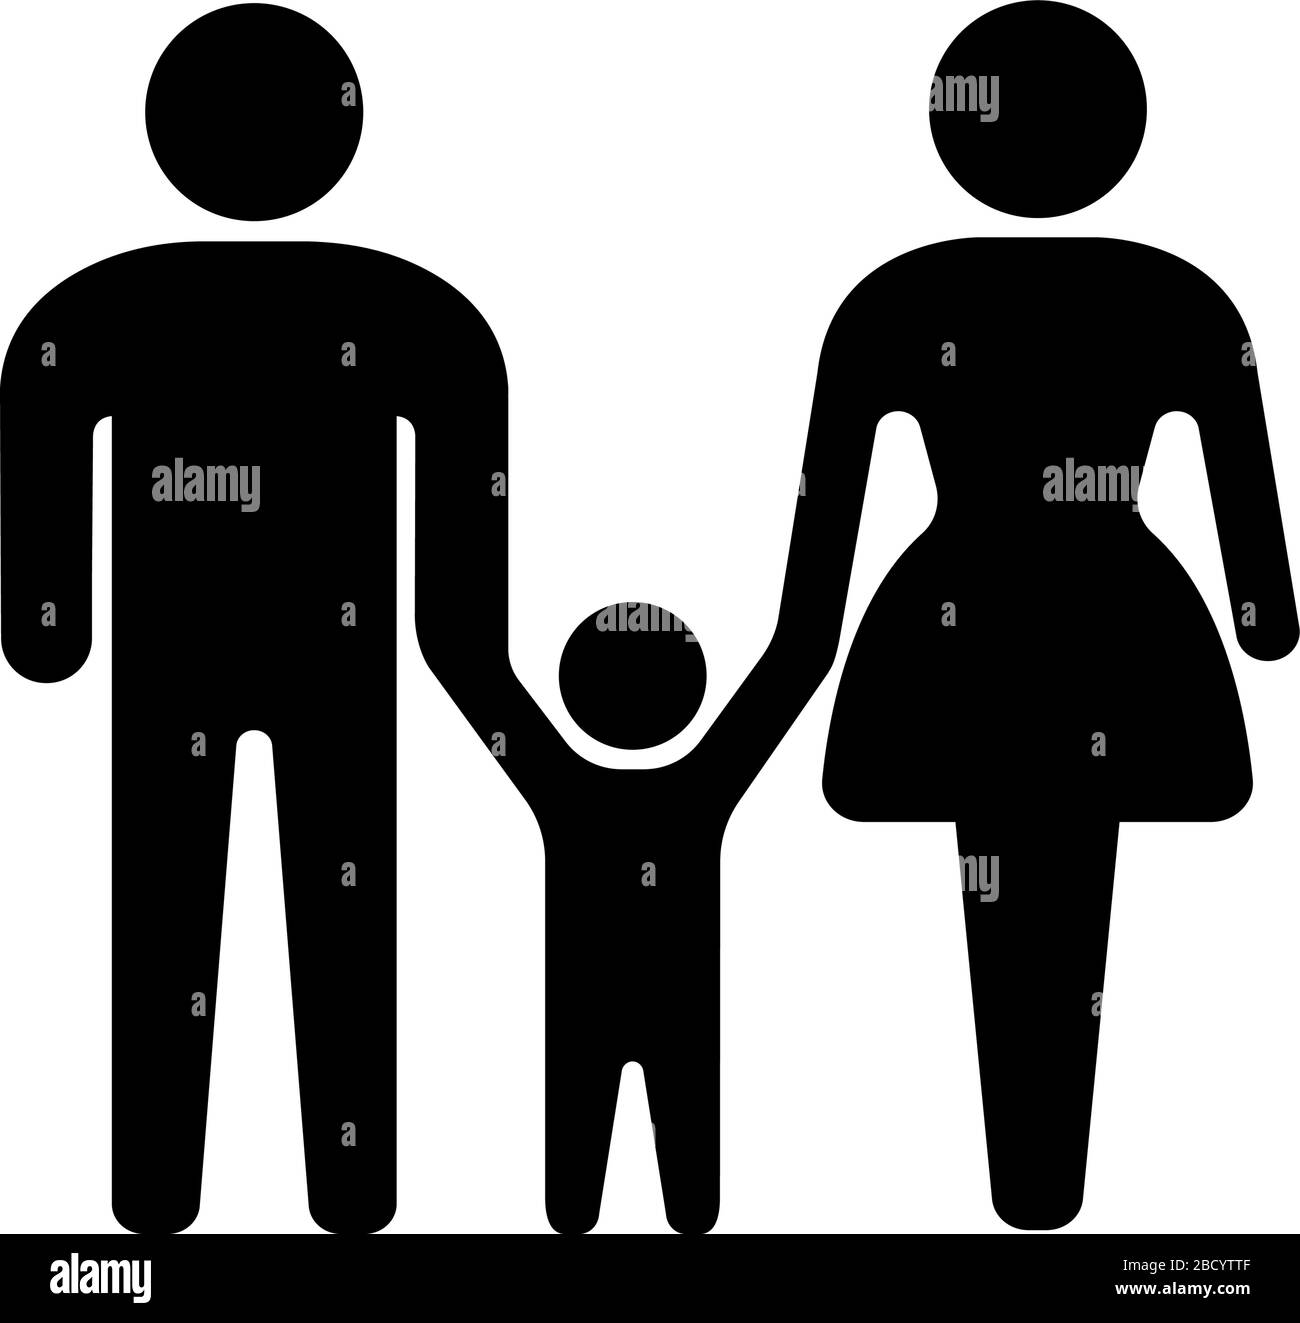 Family, Couple and son / daughter, vector icon illustration Stock Vector